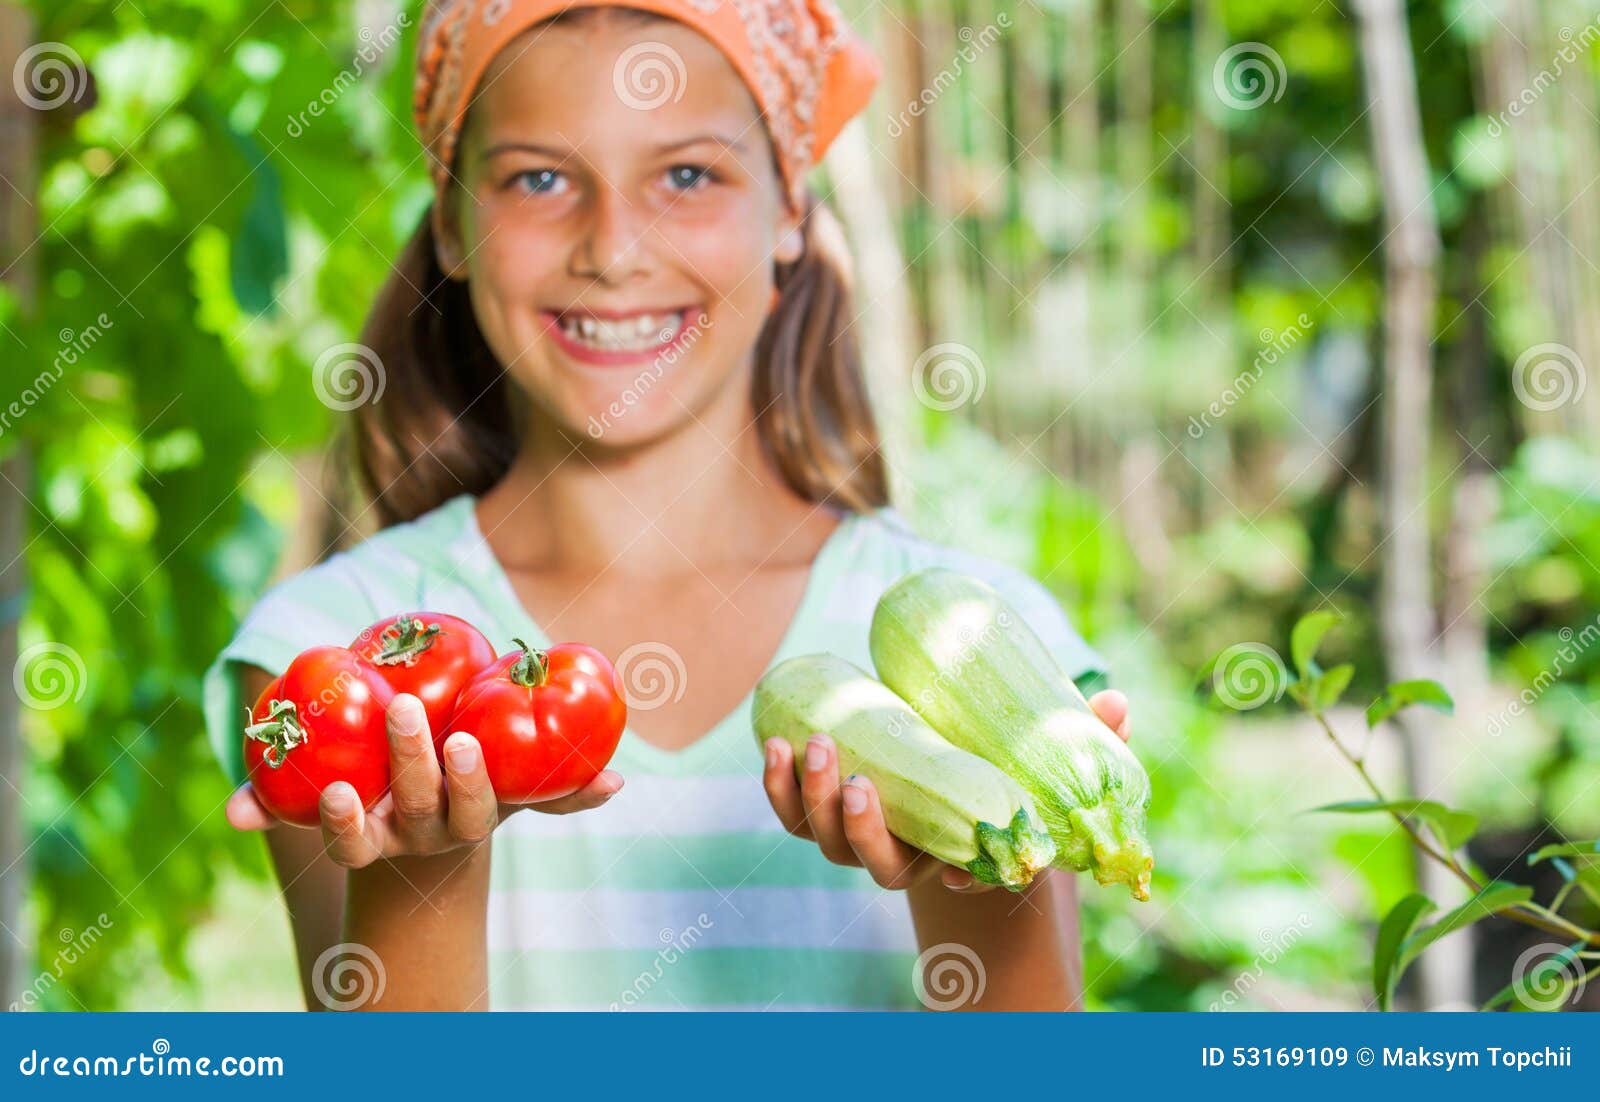 Girl with vegetables stock image. Image of dill, basil - 53169109